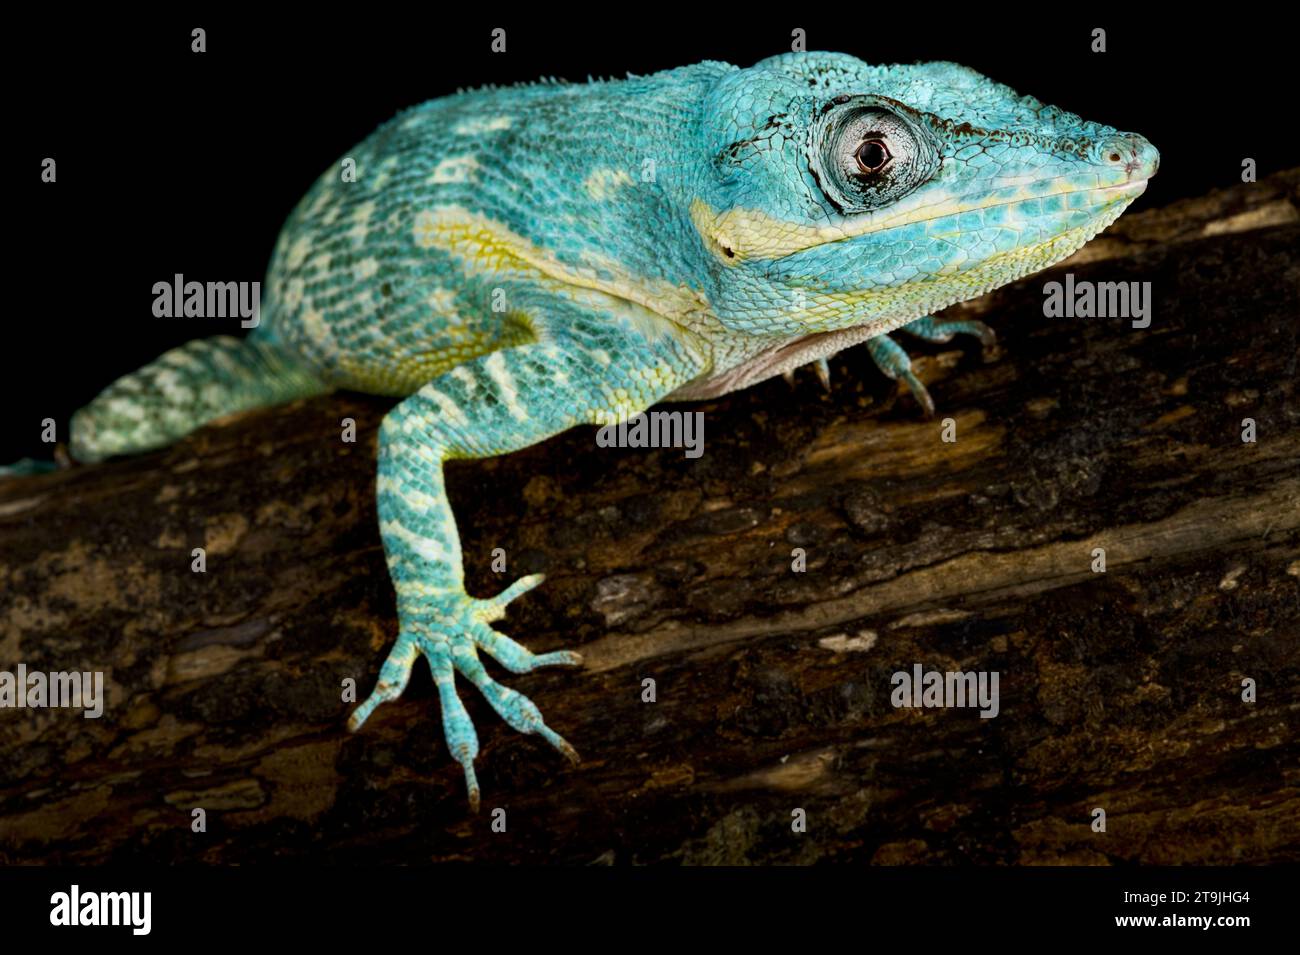 The Blue Beauty Anole (Anolis equestris potior) is a critically endangered lizard species endemic to Cayo Santa Maria island, part of Cuba. Stock Photo